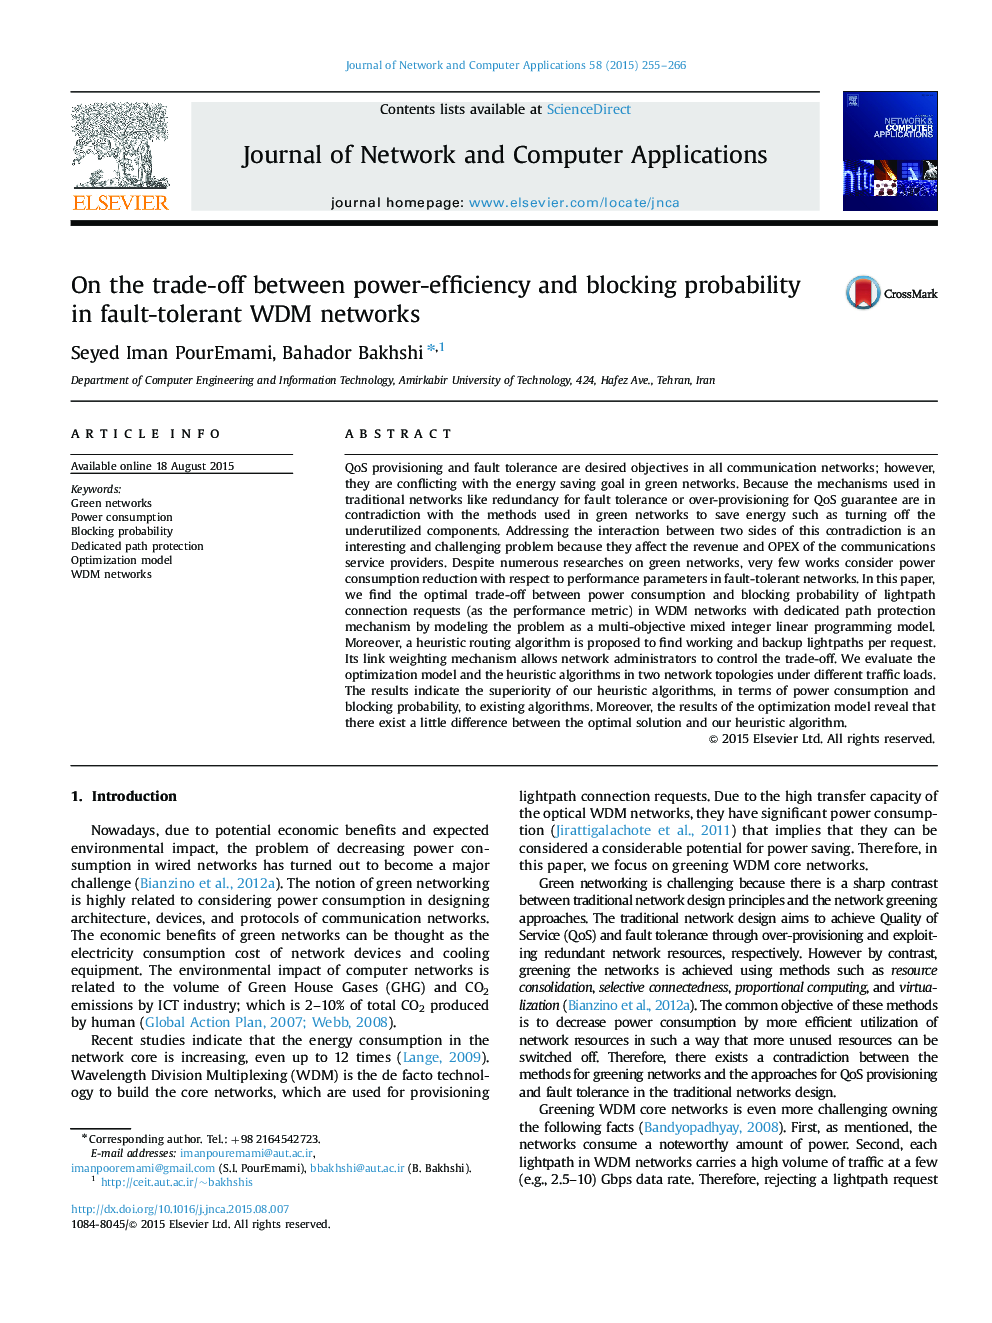 On the trade-off between power-efficiency and blocking probability in fault-tolerant WDM networks